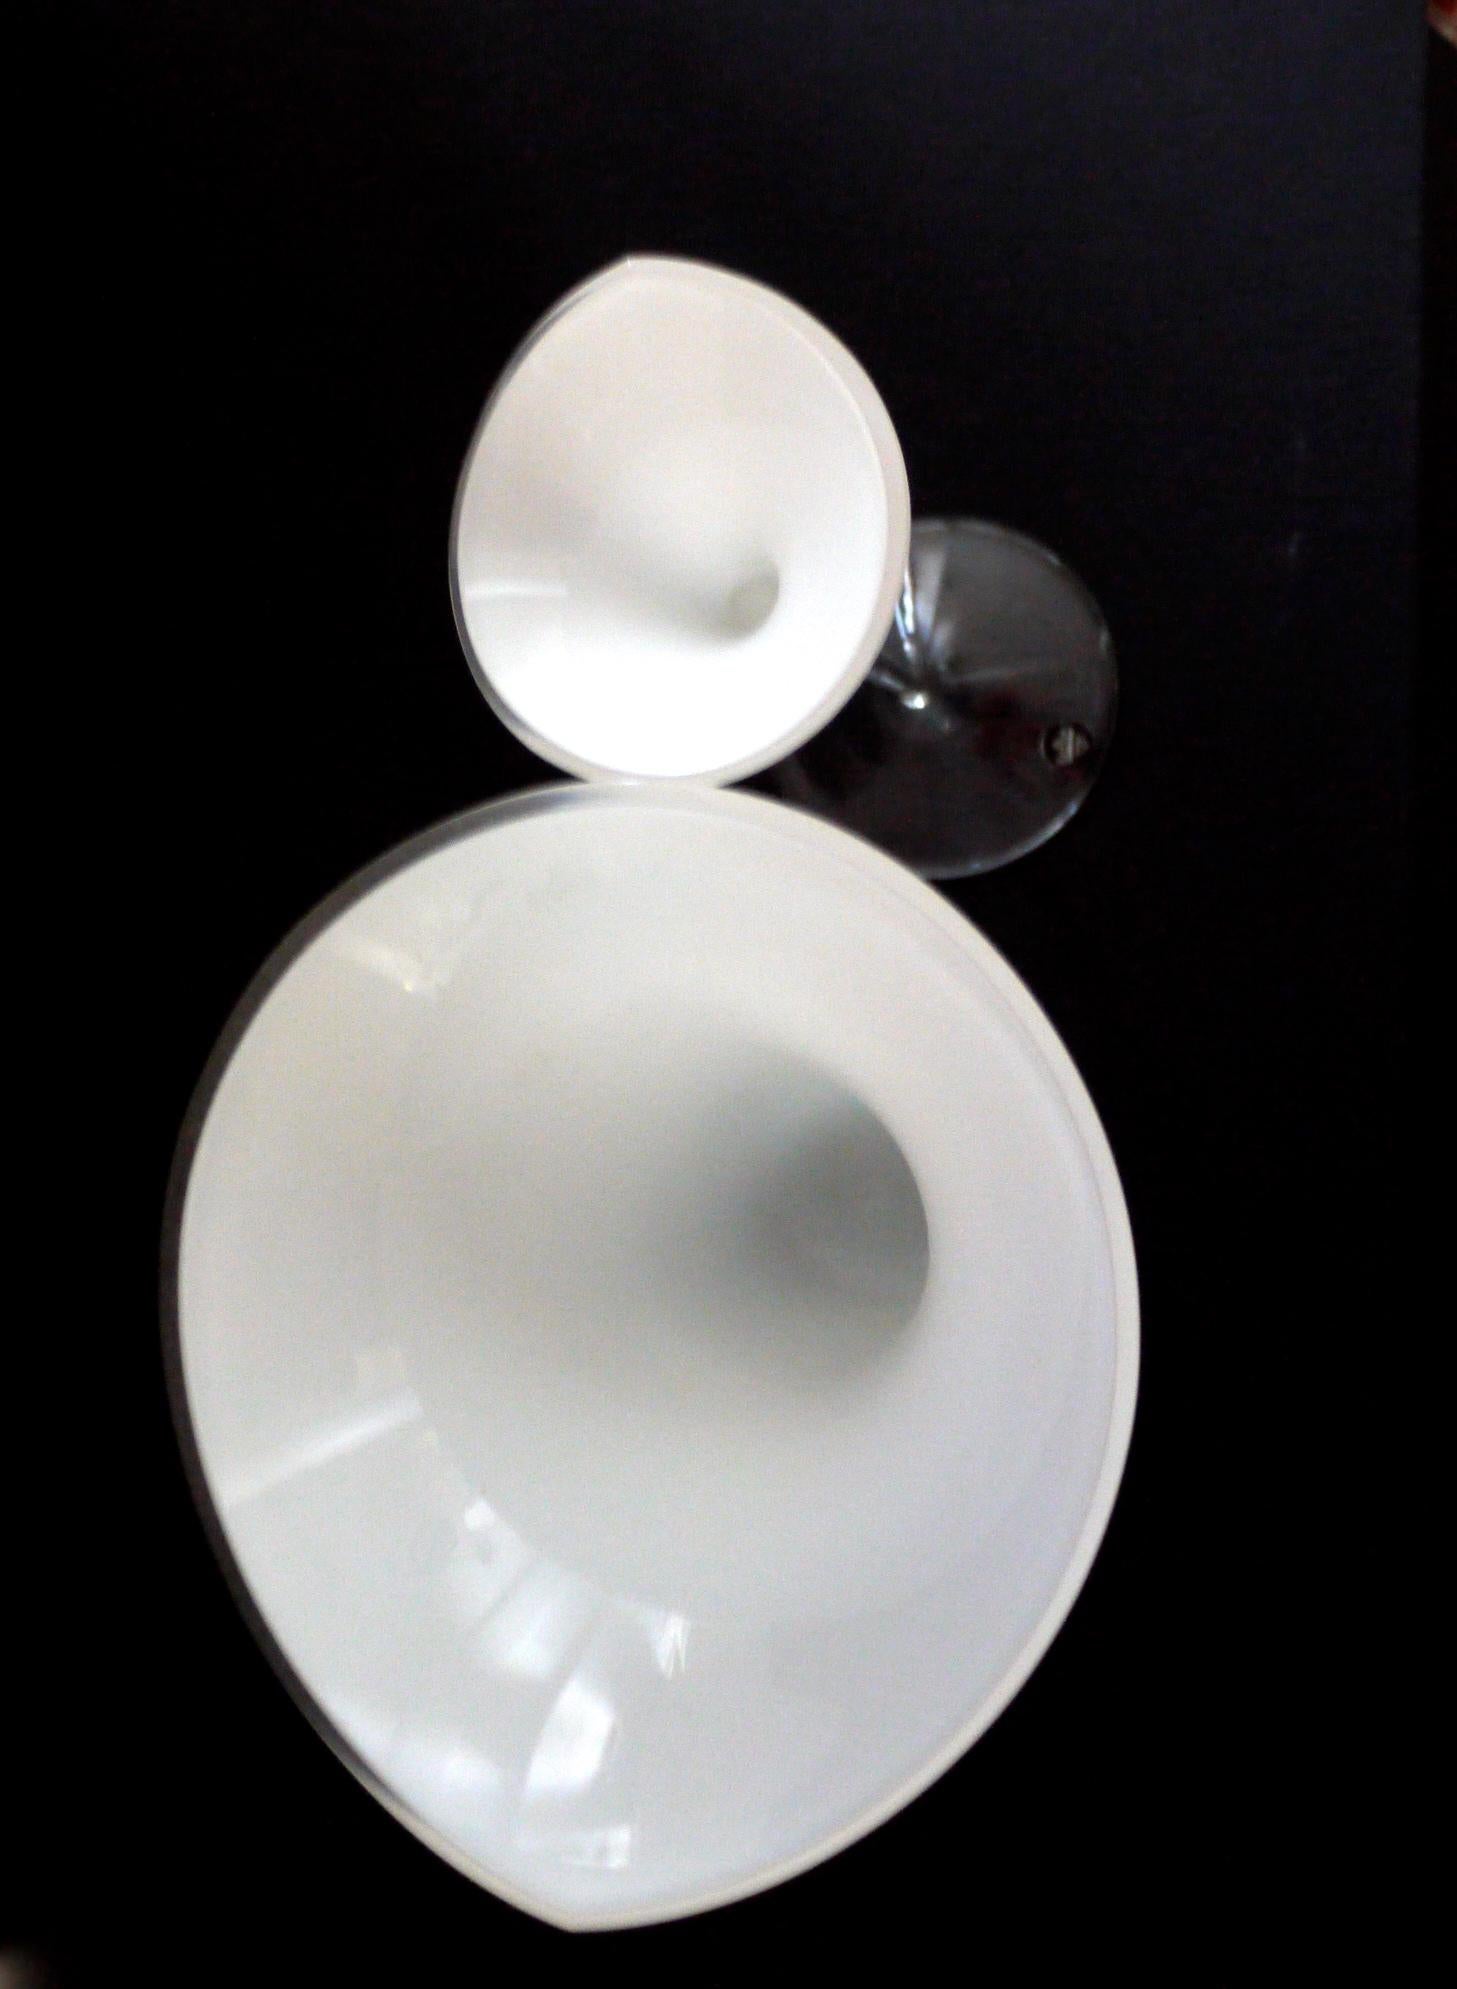 Pair of white lily vases/sculptures from Rosenthal Studio, Germany. The smaller one has the original label.
The Studio line is a subset of the Rosenthal brand and was created in the 1960s and many famous artists and designers have created works for